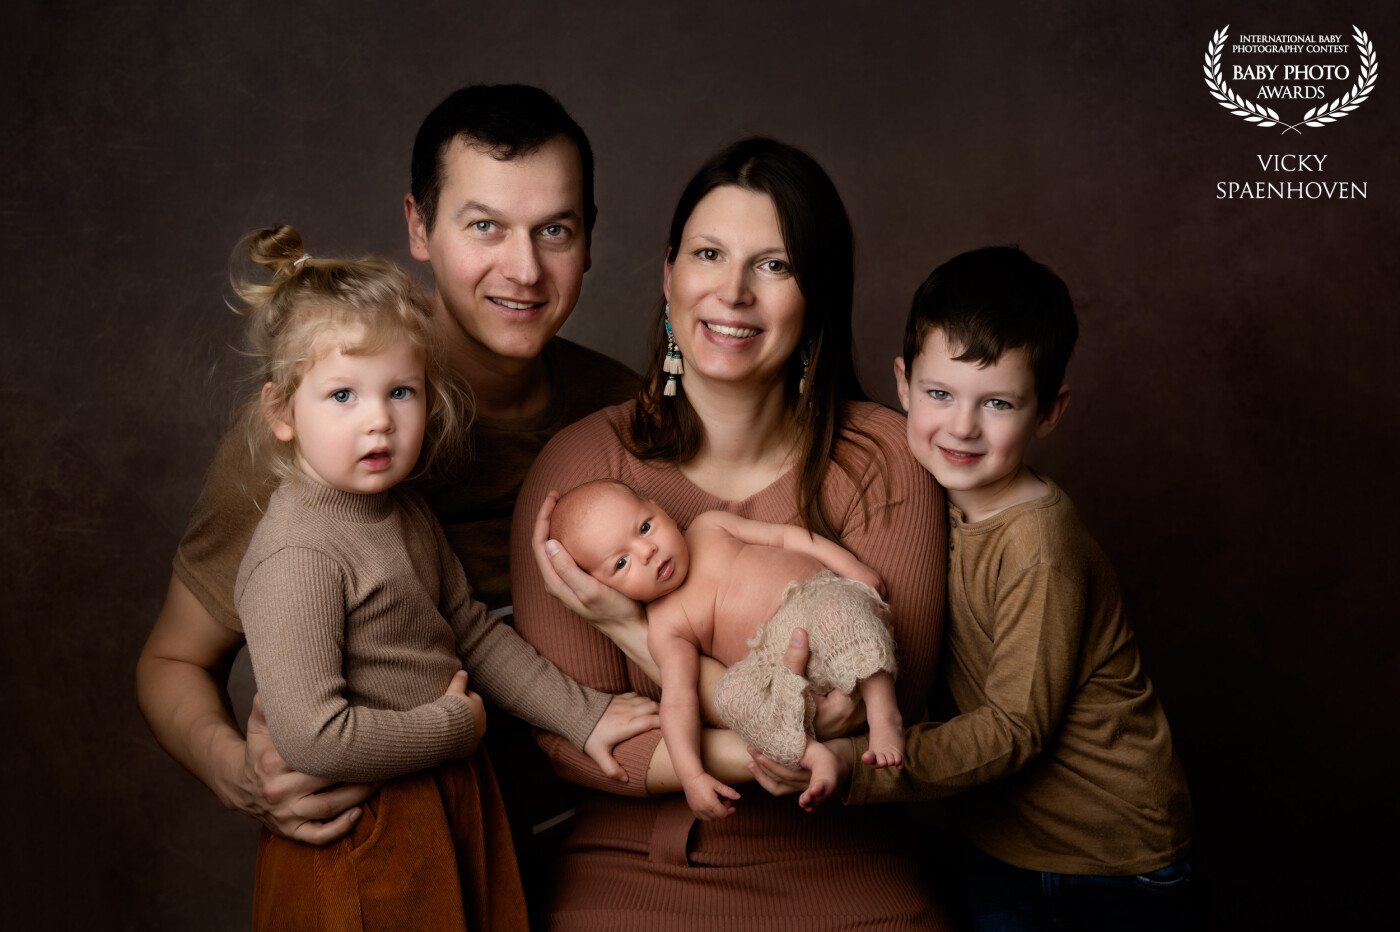 Beautiful family of five. I love their beautiful expressions and the warm color tones in this image.